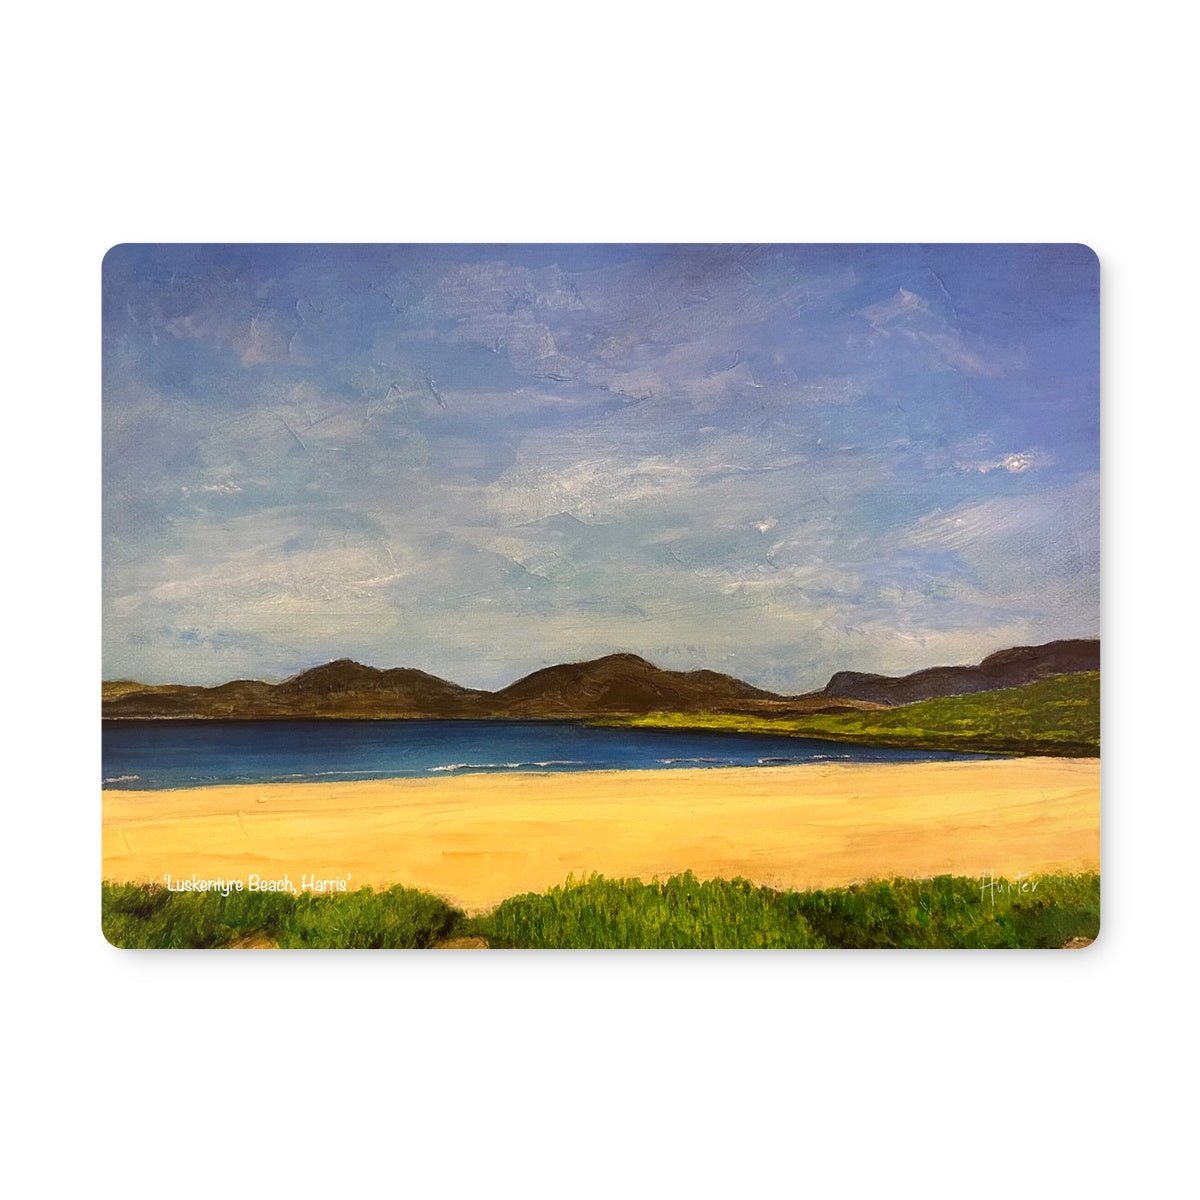 Luskentyre Beach Harris Art Gifts Placemat-Placemats-Hebridean Islands Art Gallery-4 Placemats-Paintings, Prints, Homeware, Art Gifts From Scotland By Scottish Artist Kevin Hunter